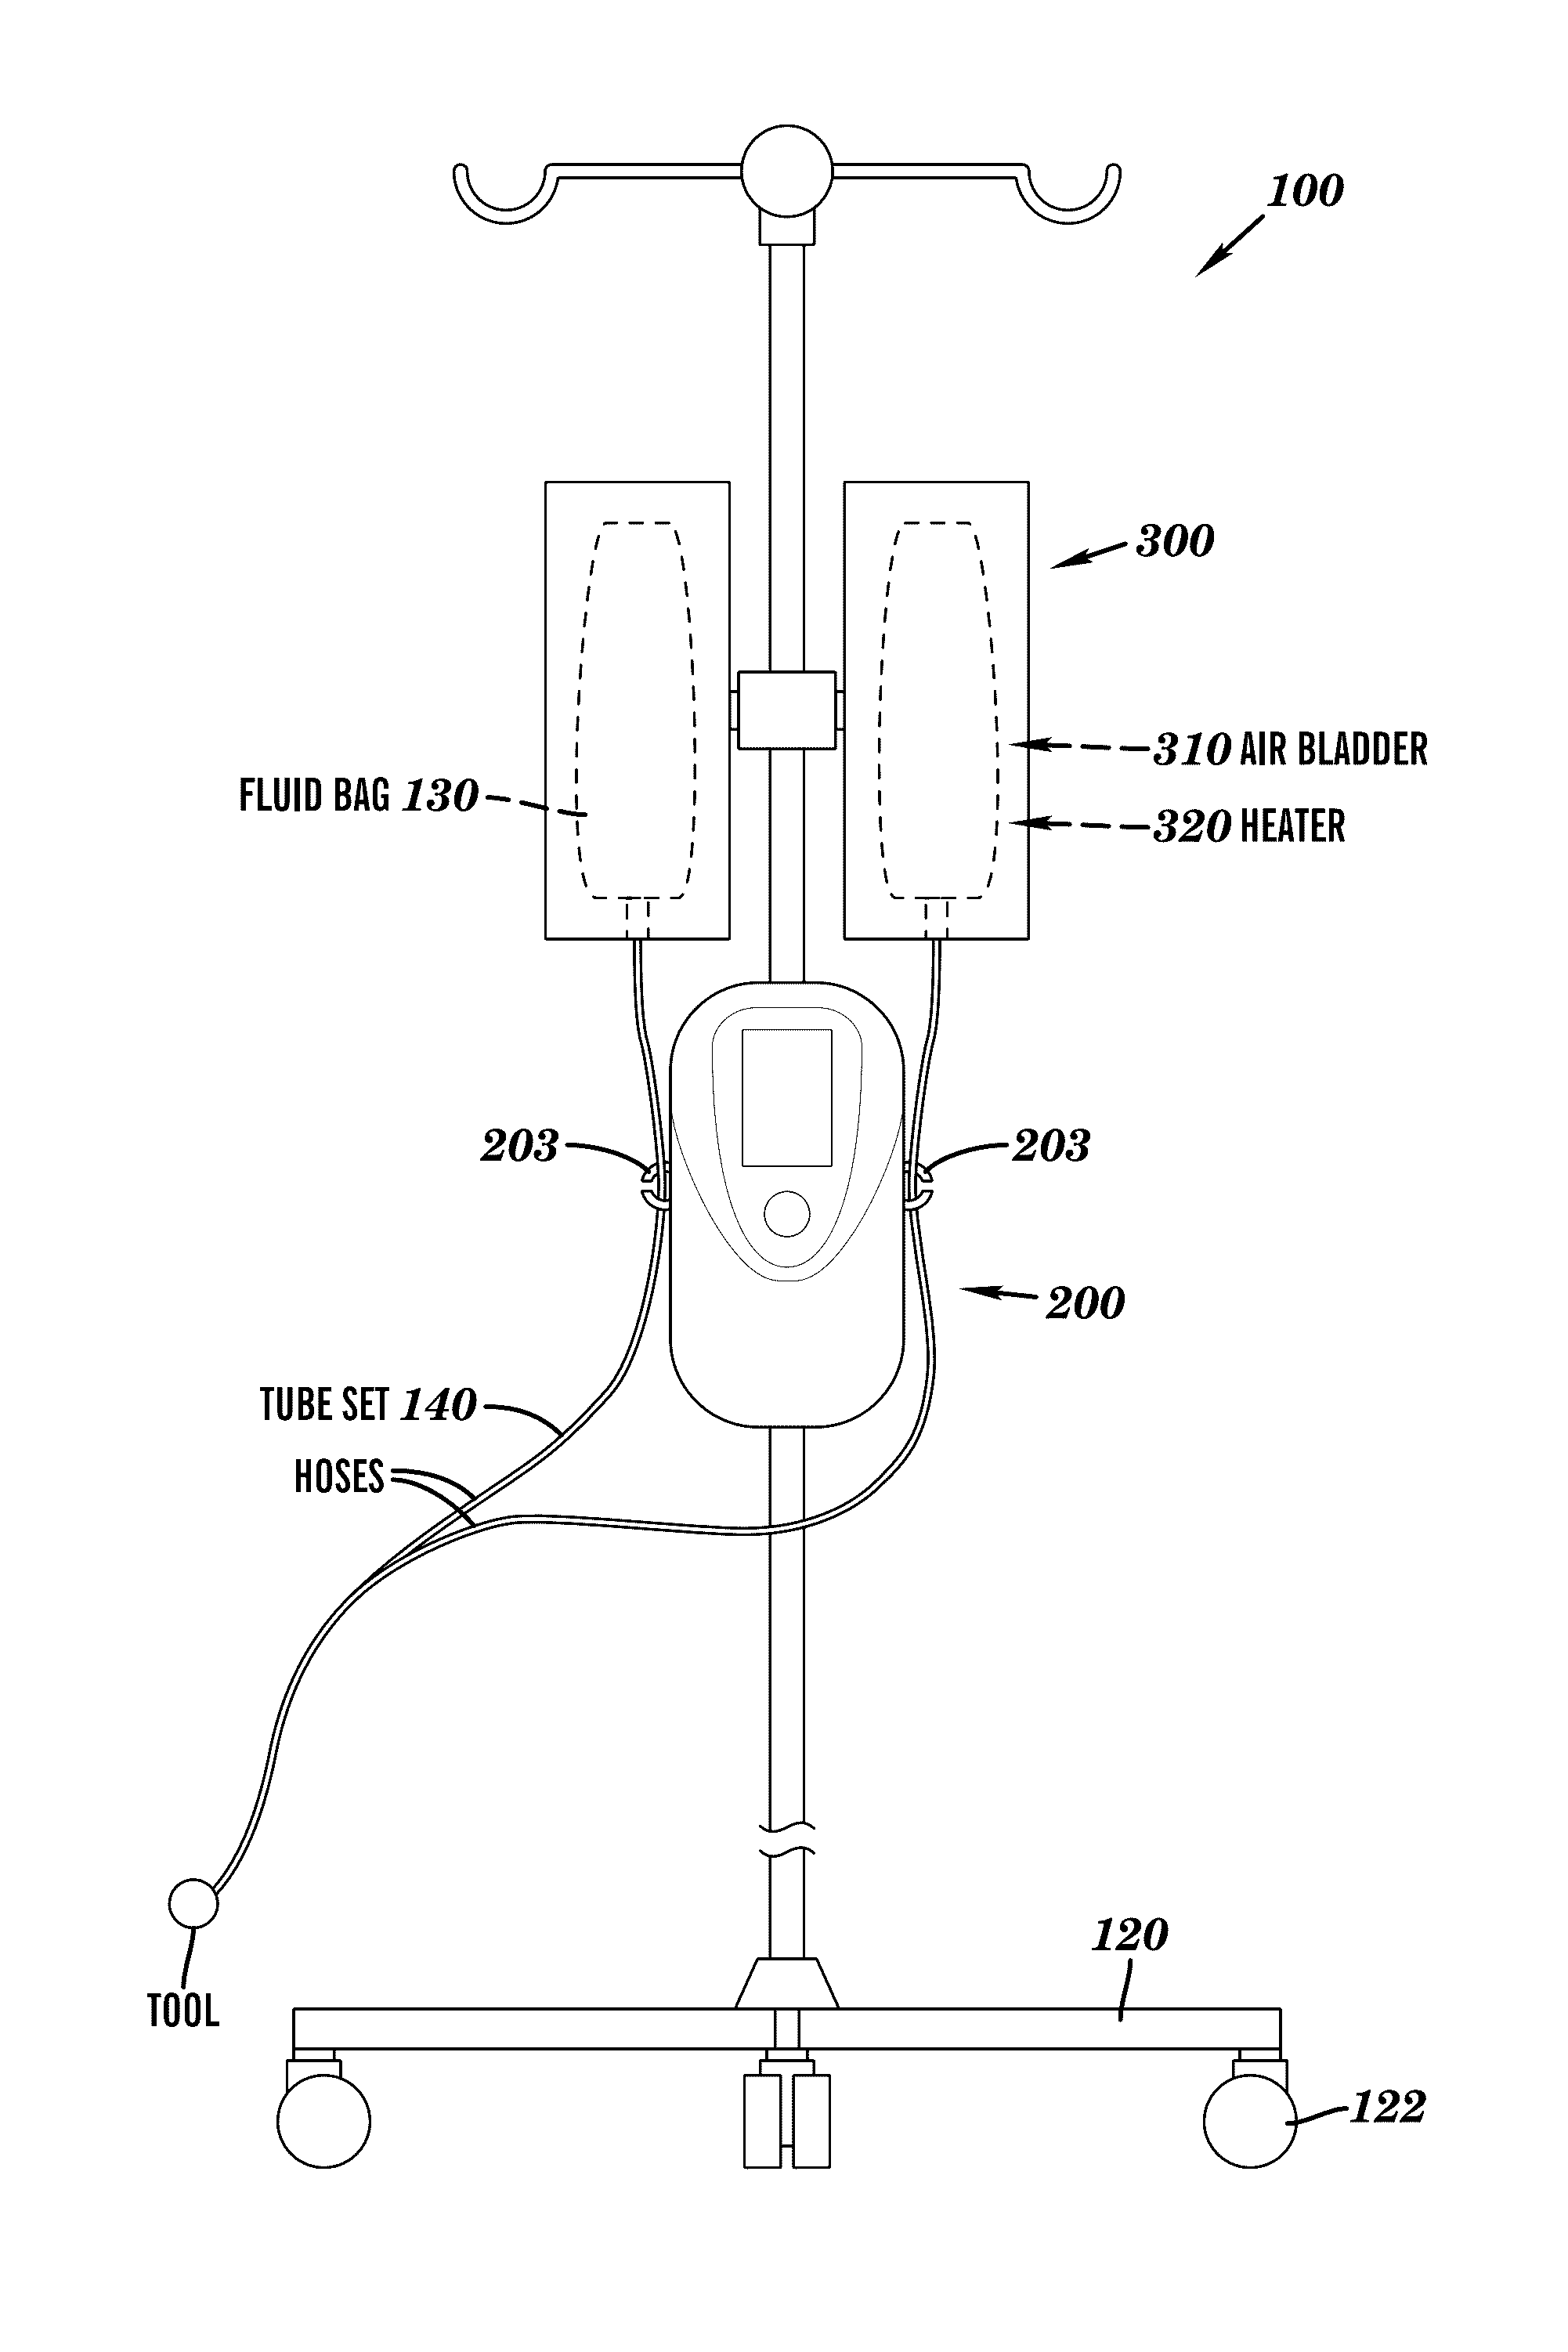 Fluid infusion system